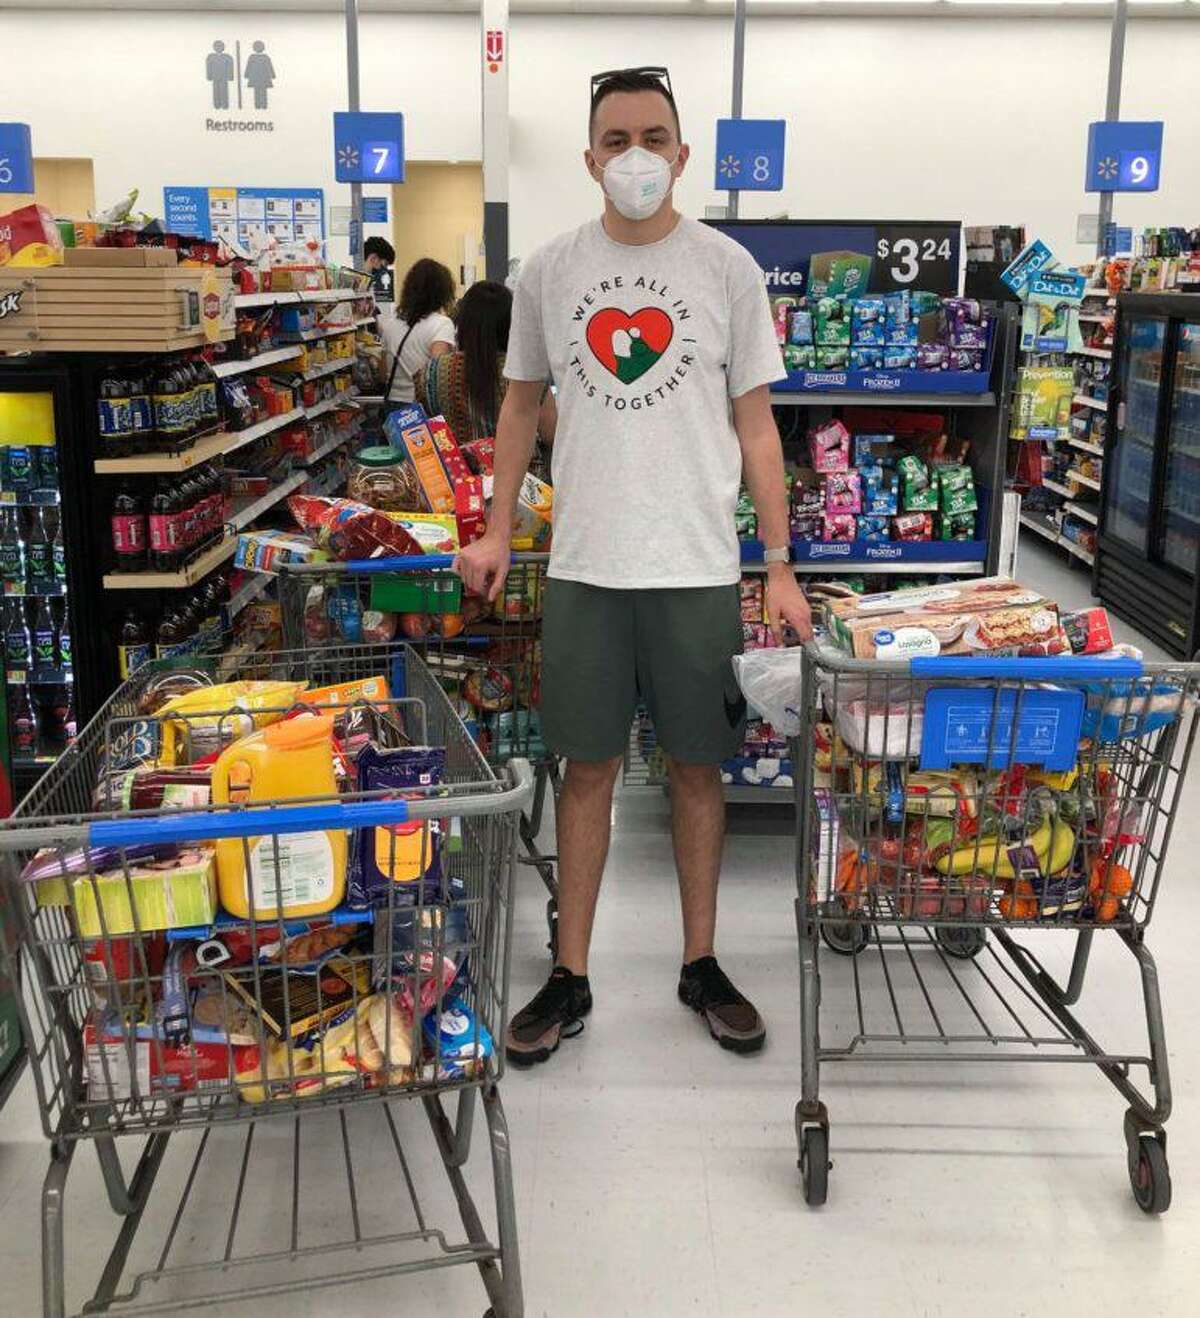 Mansfield Middle School teacher Louis Goffinet makes one of his dozens of grocery runs during the height of the pandemic.